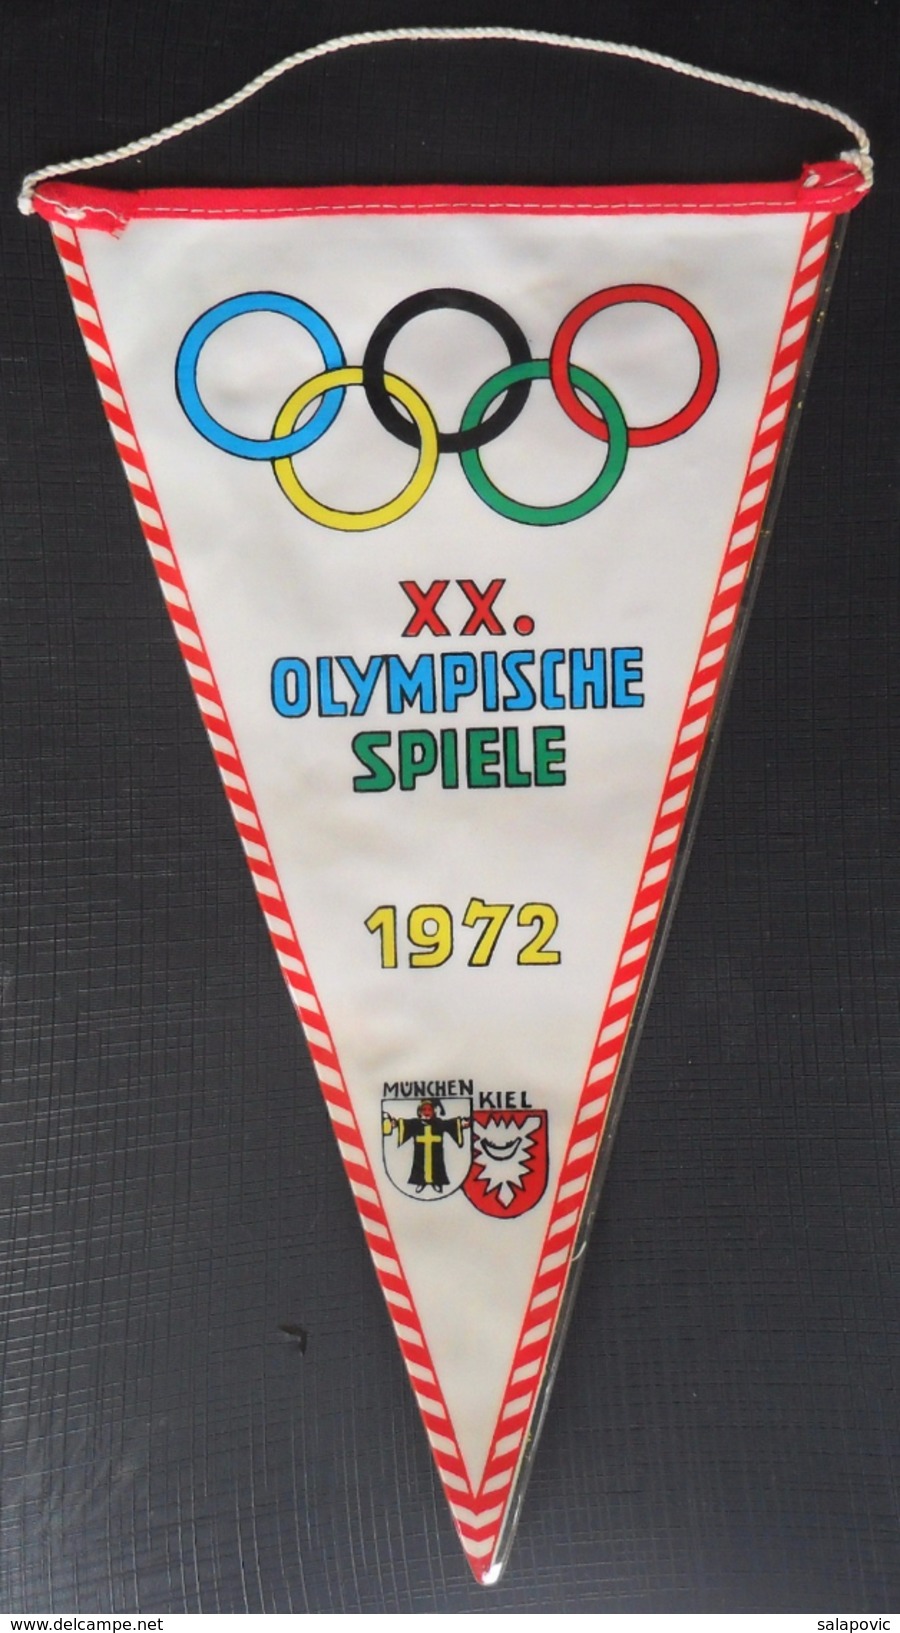 XX. OLYMPISCHE SPIELE 1972 MUNCHEN, XX. OLYMPIC GAMES 1972 MUNICH OLD PENNANT - Apparel, Souvenirs & Other